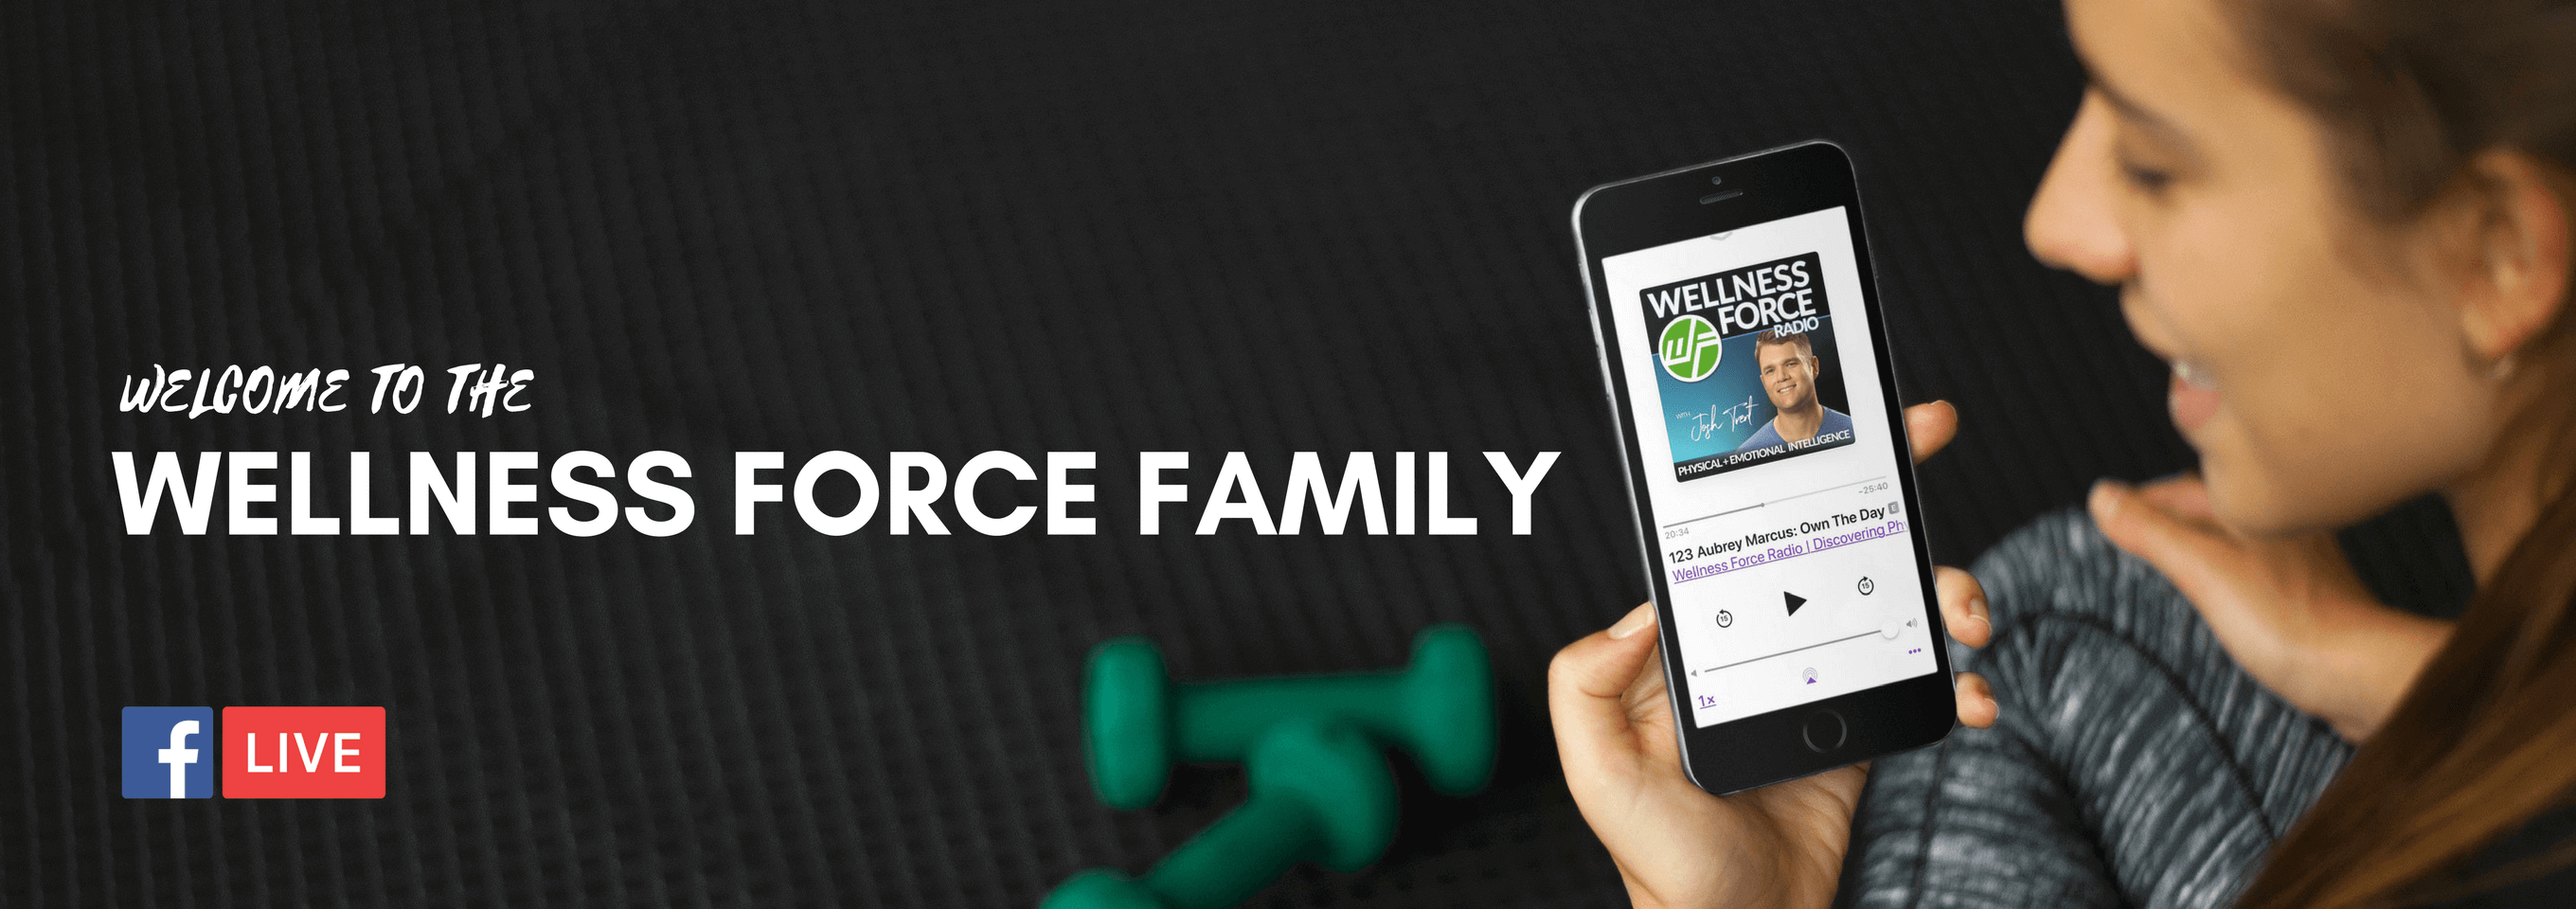 welcome to wellness force VIP